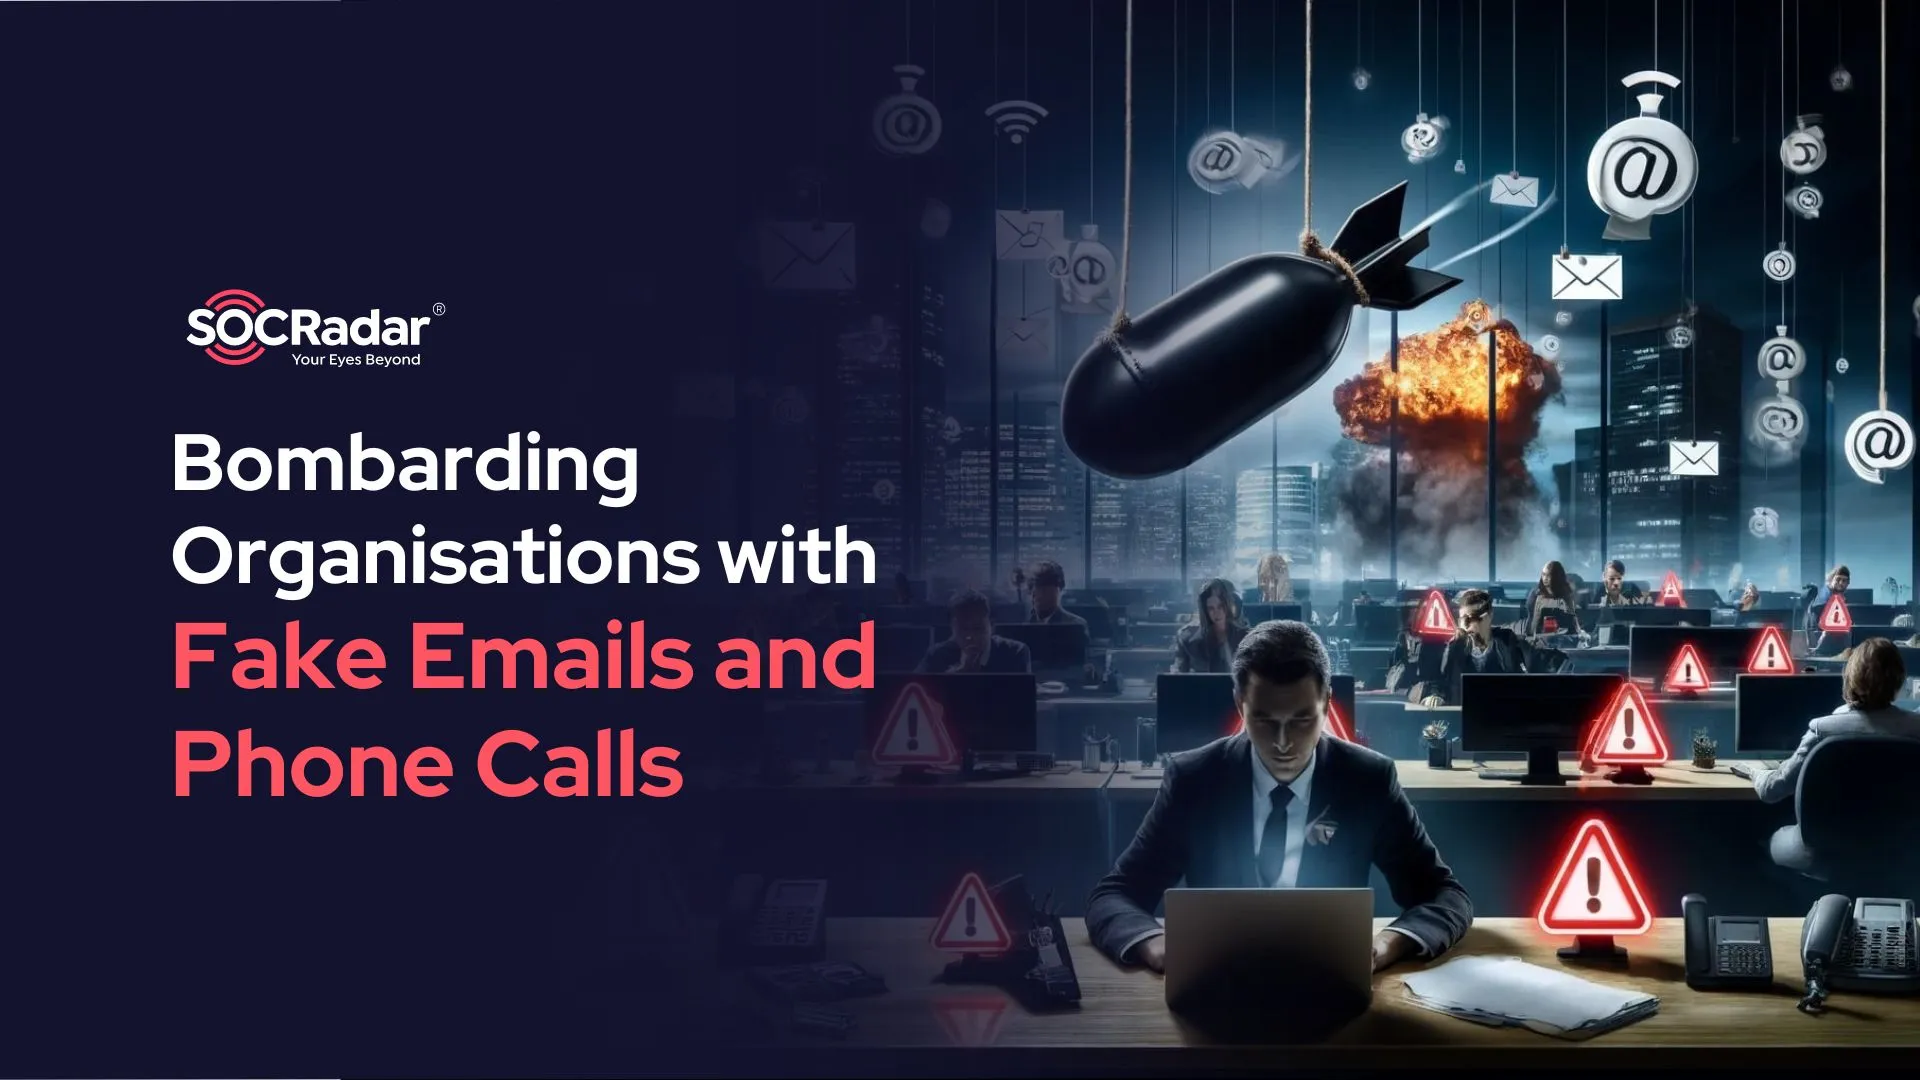 SOCRadar® Cyber Intelligence Inc. | New Cyber Attack Campaign Bombarding Organizations with Fake Emails and Phone Calls